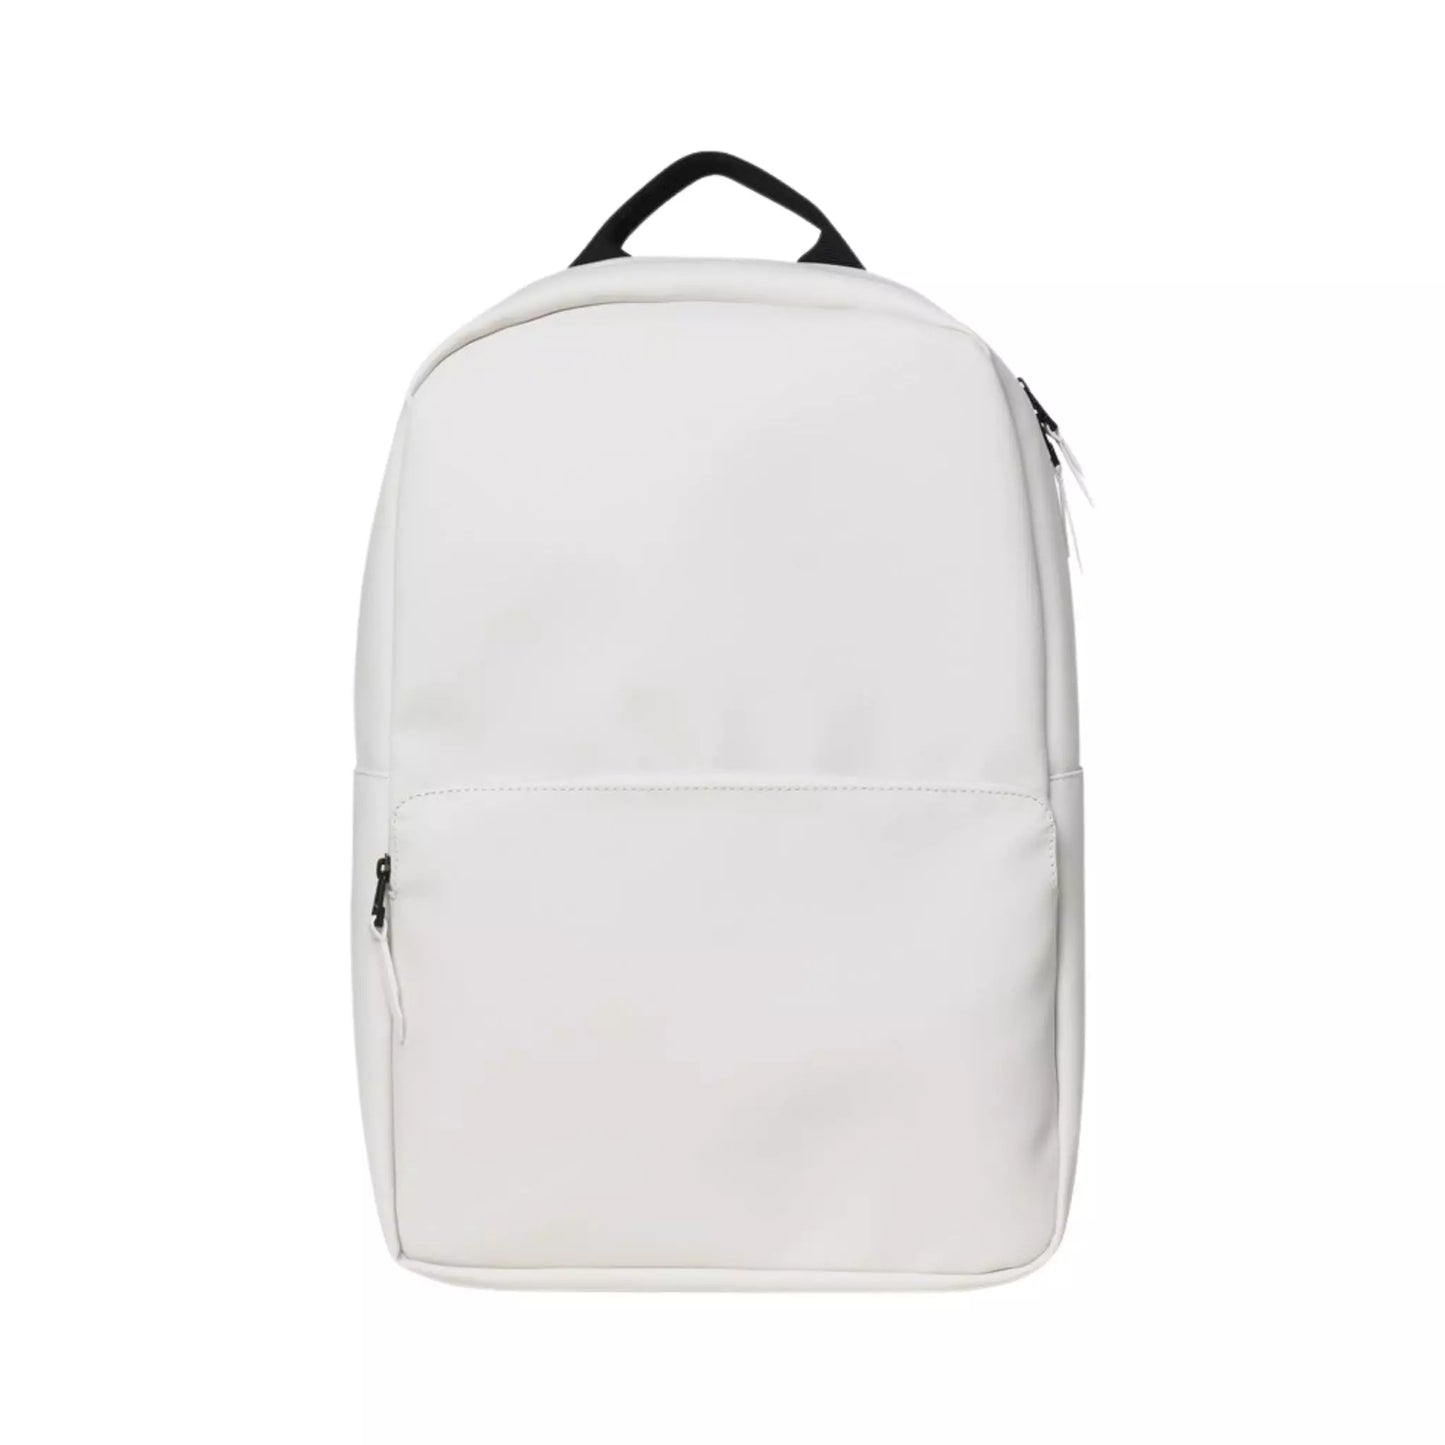 Rains waterproof backpack field bag off white for men and women front view